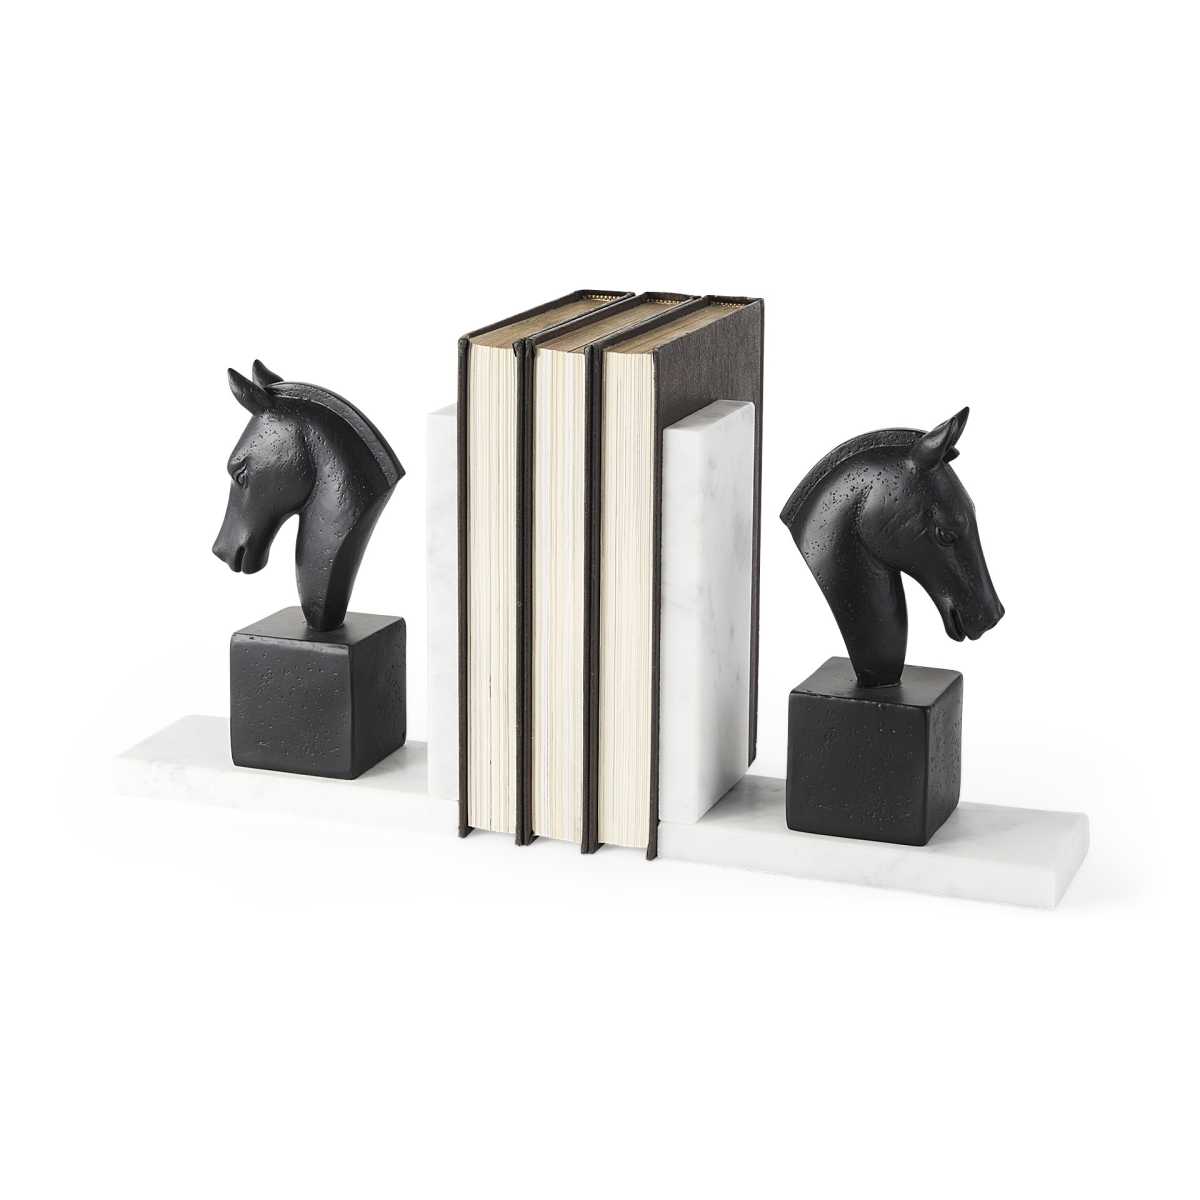 Picture of HomeRoots 392138 8.2 x 3.1 x 14.3 in. Black Stallion on White Marble Bookends - Black